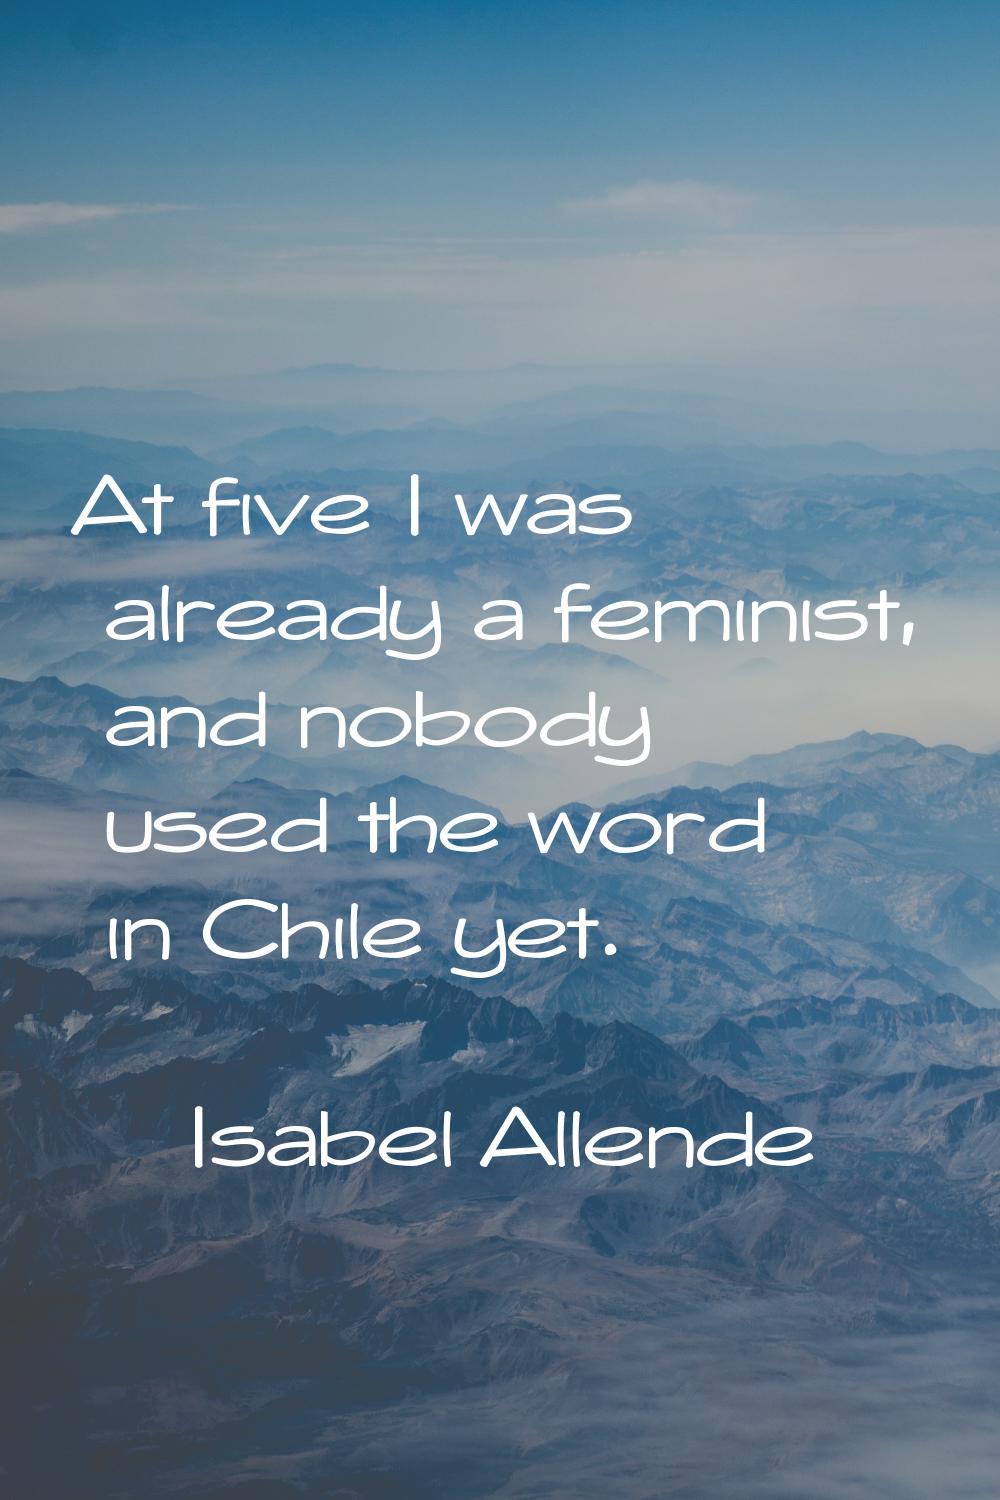 At five I was already a feminist, and nobody used the word in Chile yet.